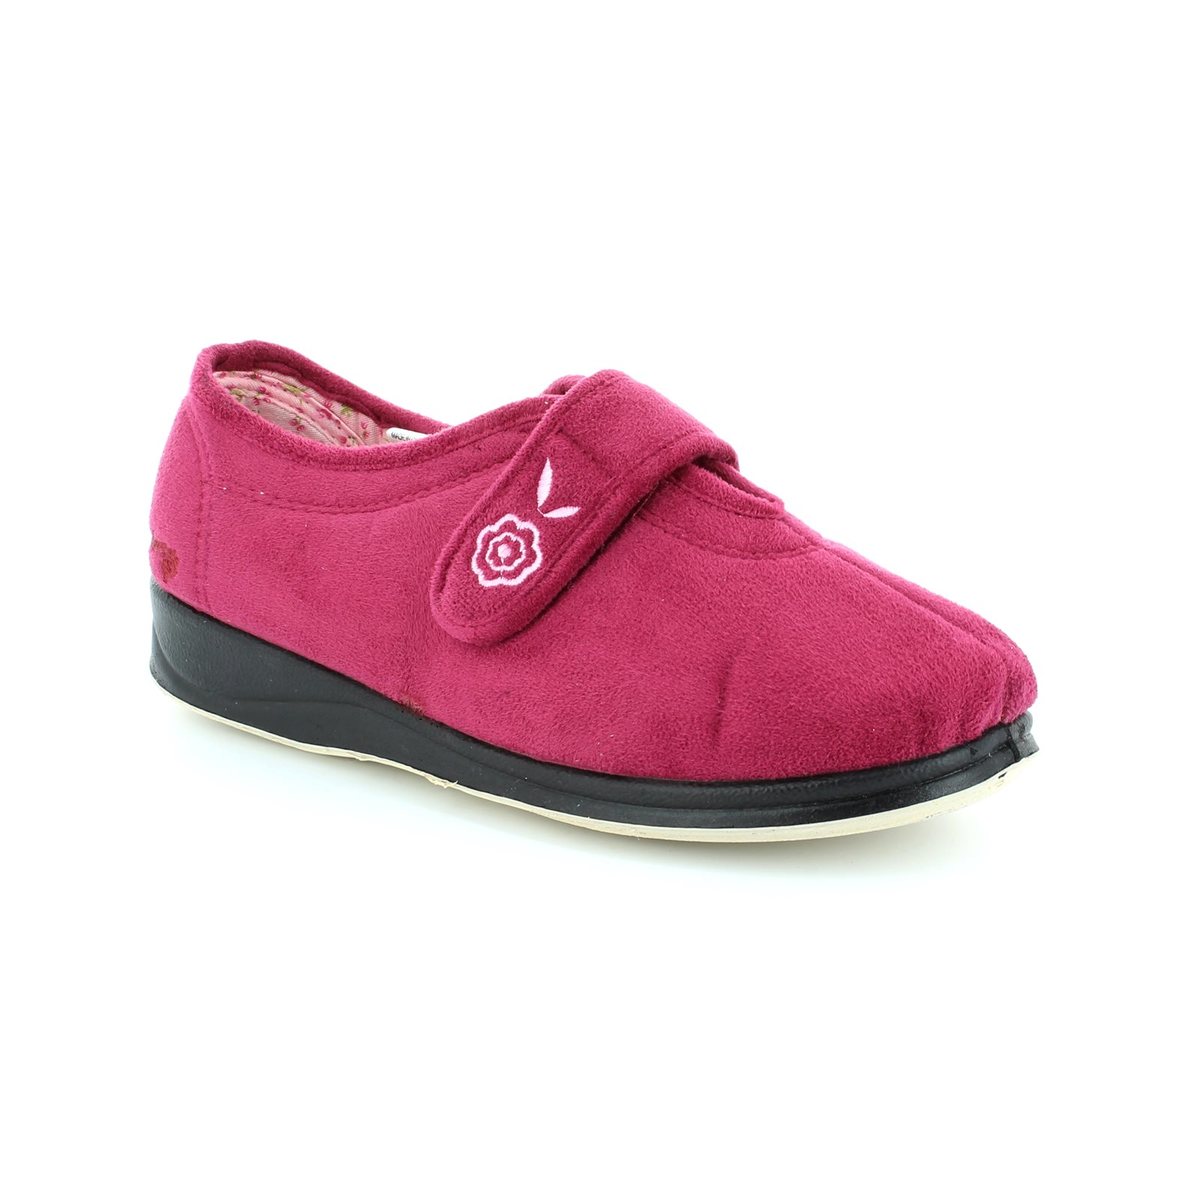 Padders Camilla Fuchsia Womens slippers 447-69 in a Plain Microsuede in Size 5